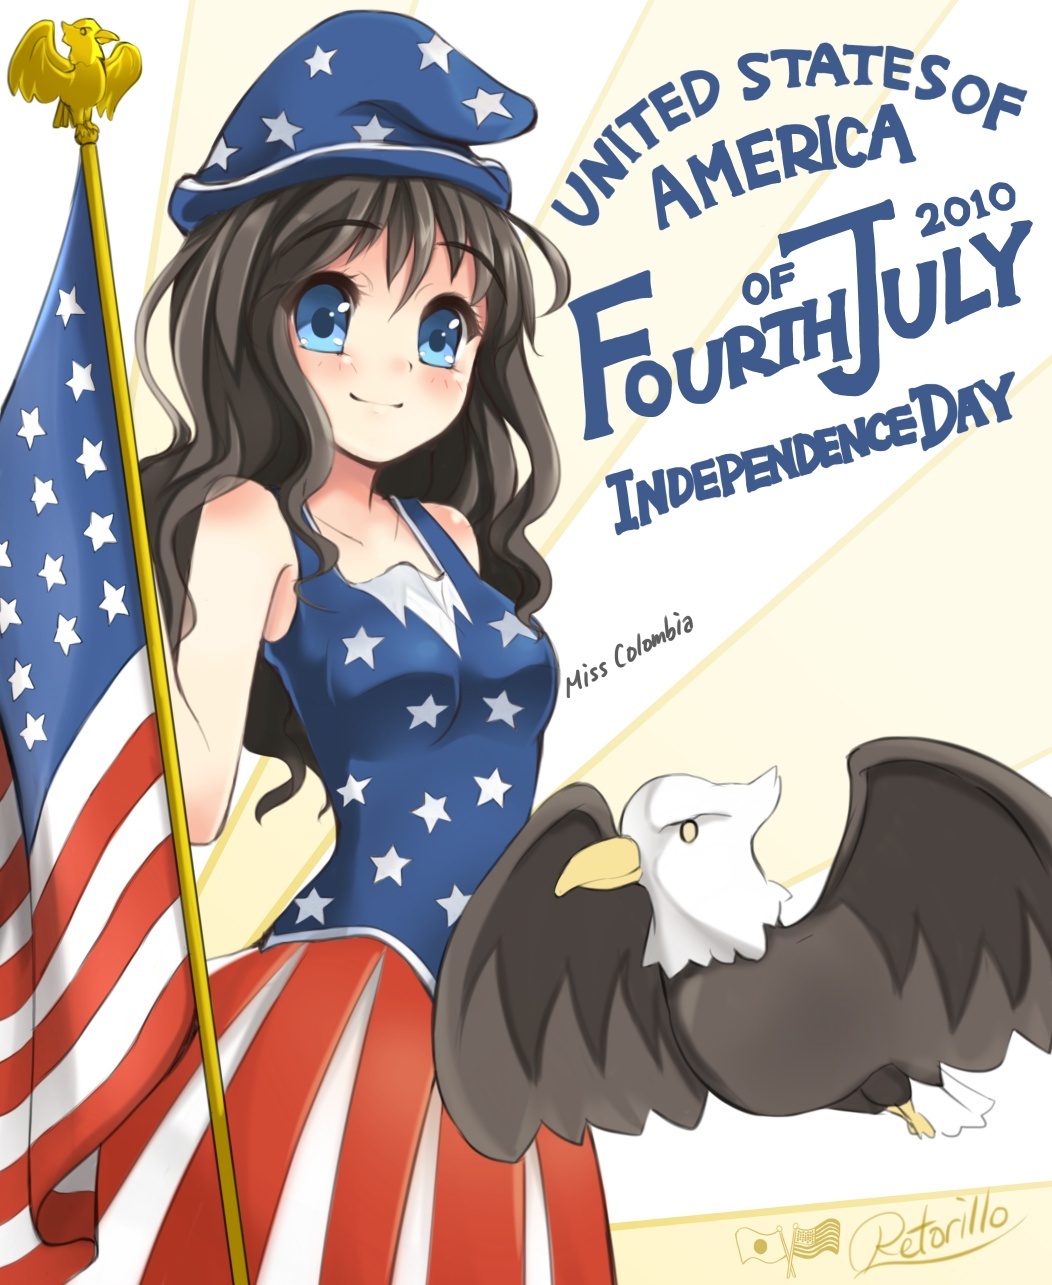 HAPPY FOURTH OF JULY! - Imgflip